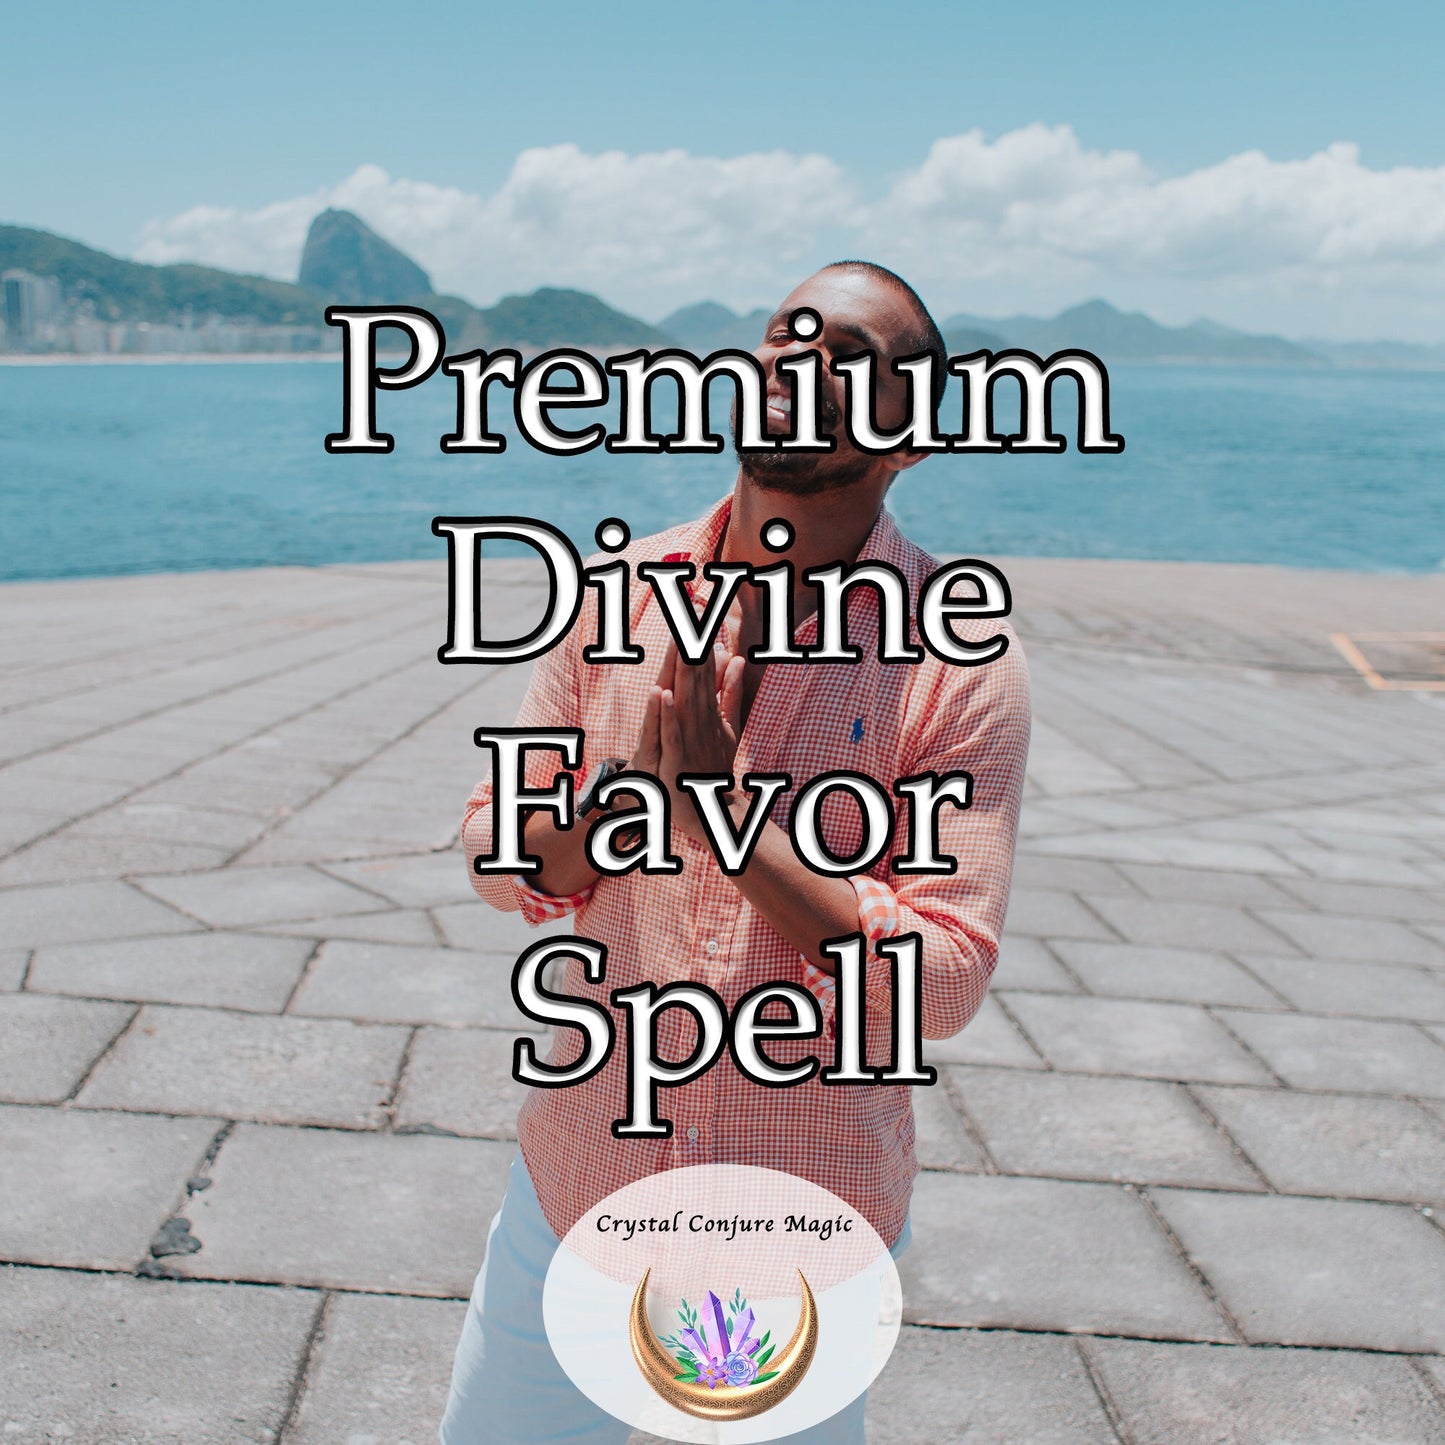 Premium Divine Favor Spell - become an irresistible beacon of light for divine forces to guide and favor